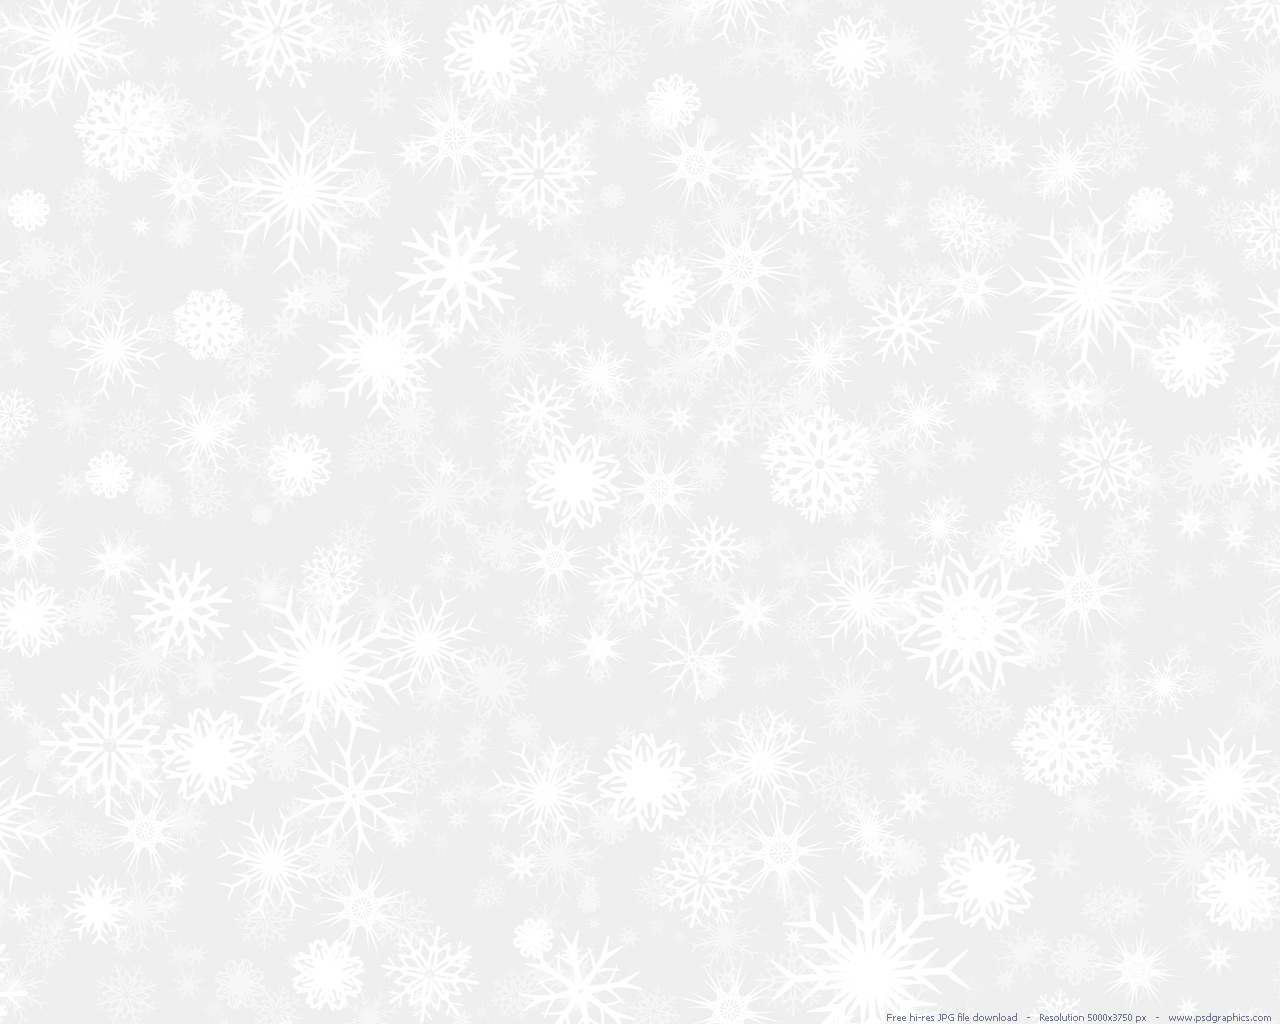 Large preview 1280x1024px White snow